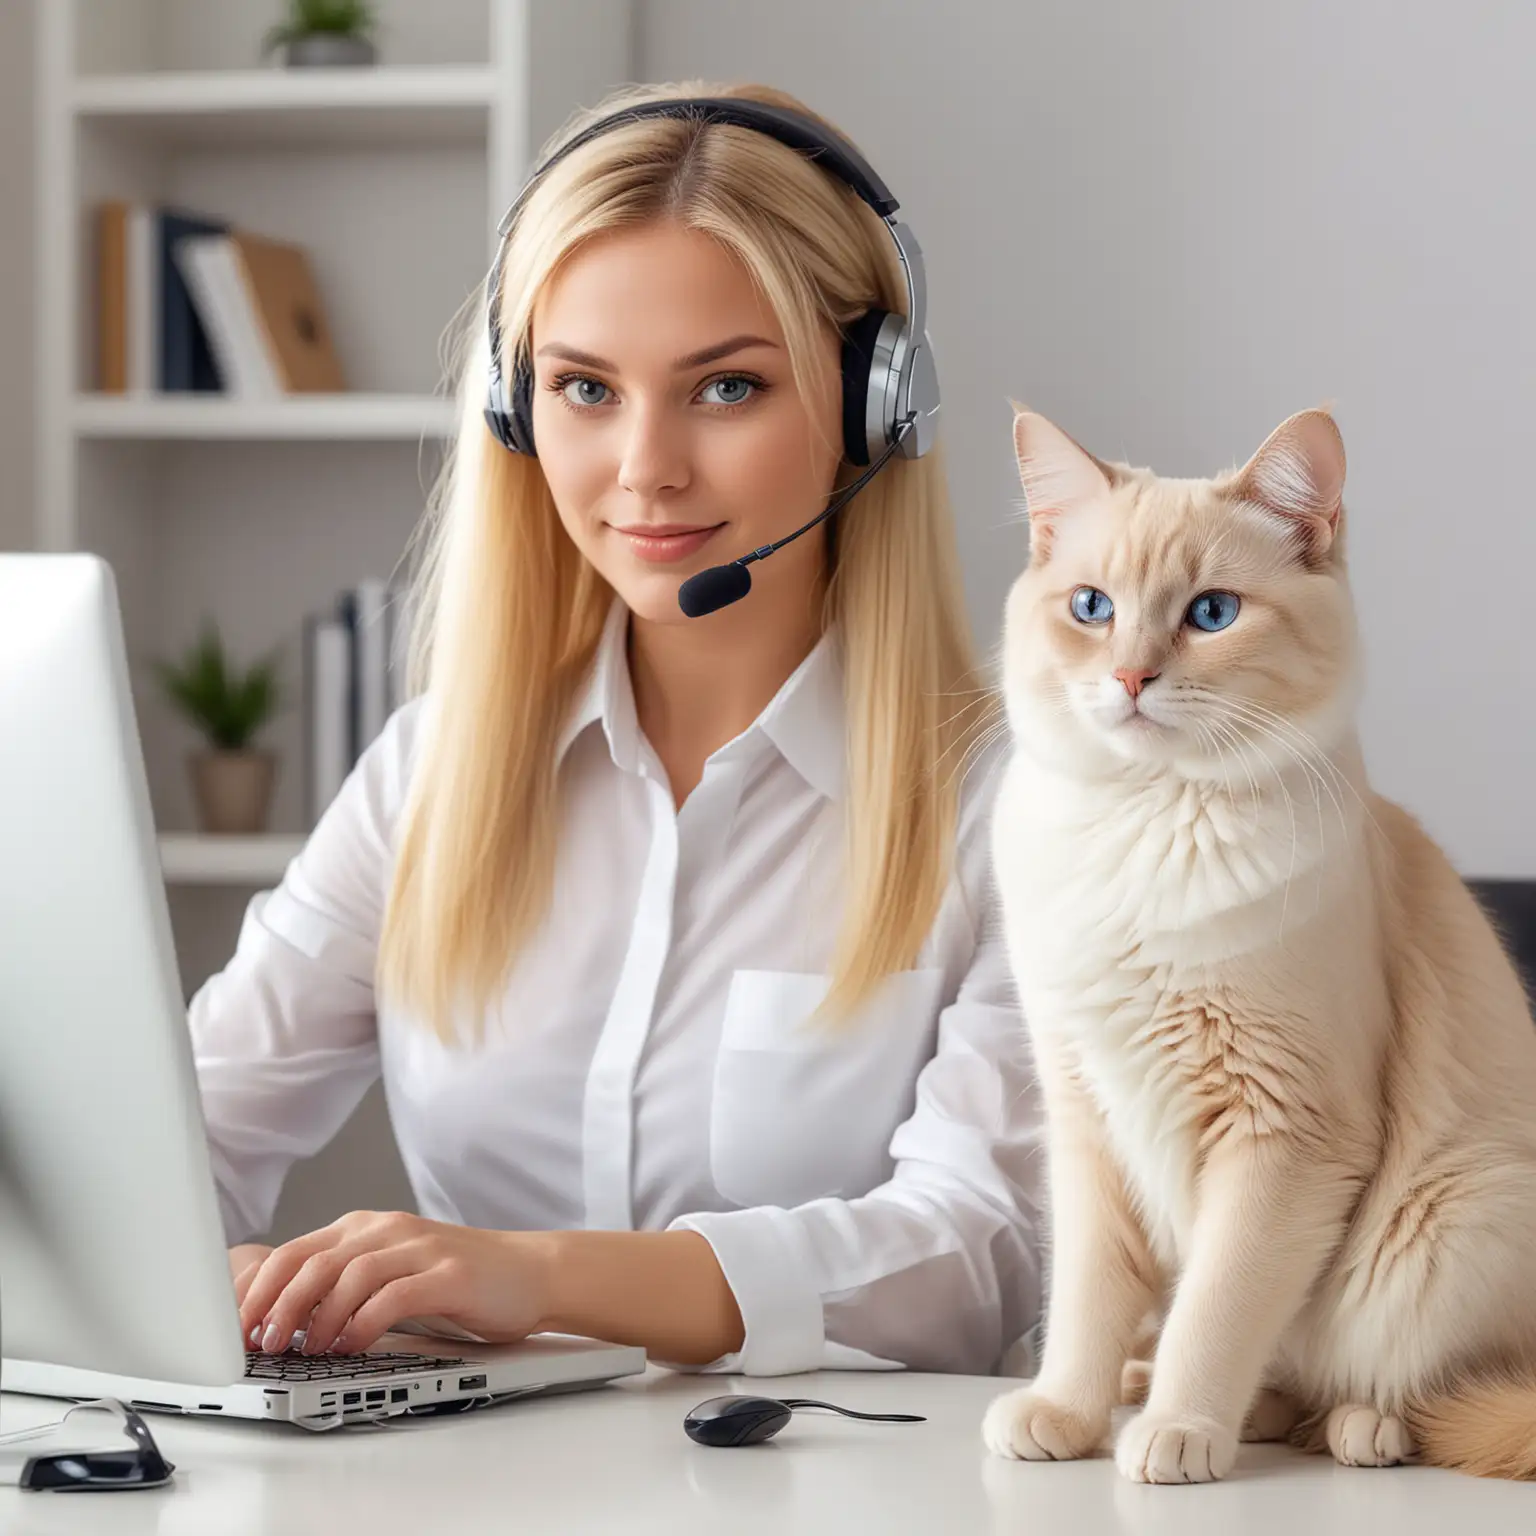 contact center agent working from home with ragdoll cat, realitic woman with blonde hair, smooth and luxurious, futuristic imaging with an empathetic look.